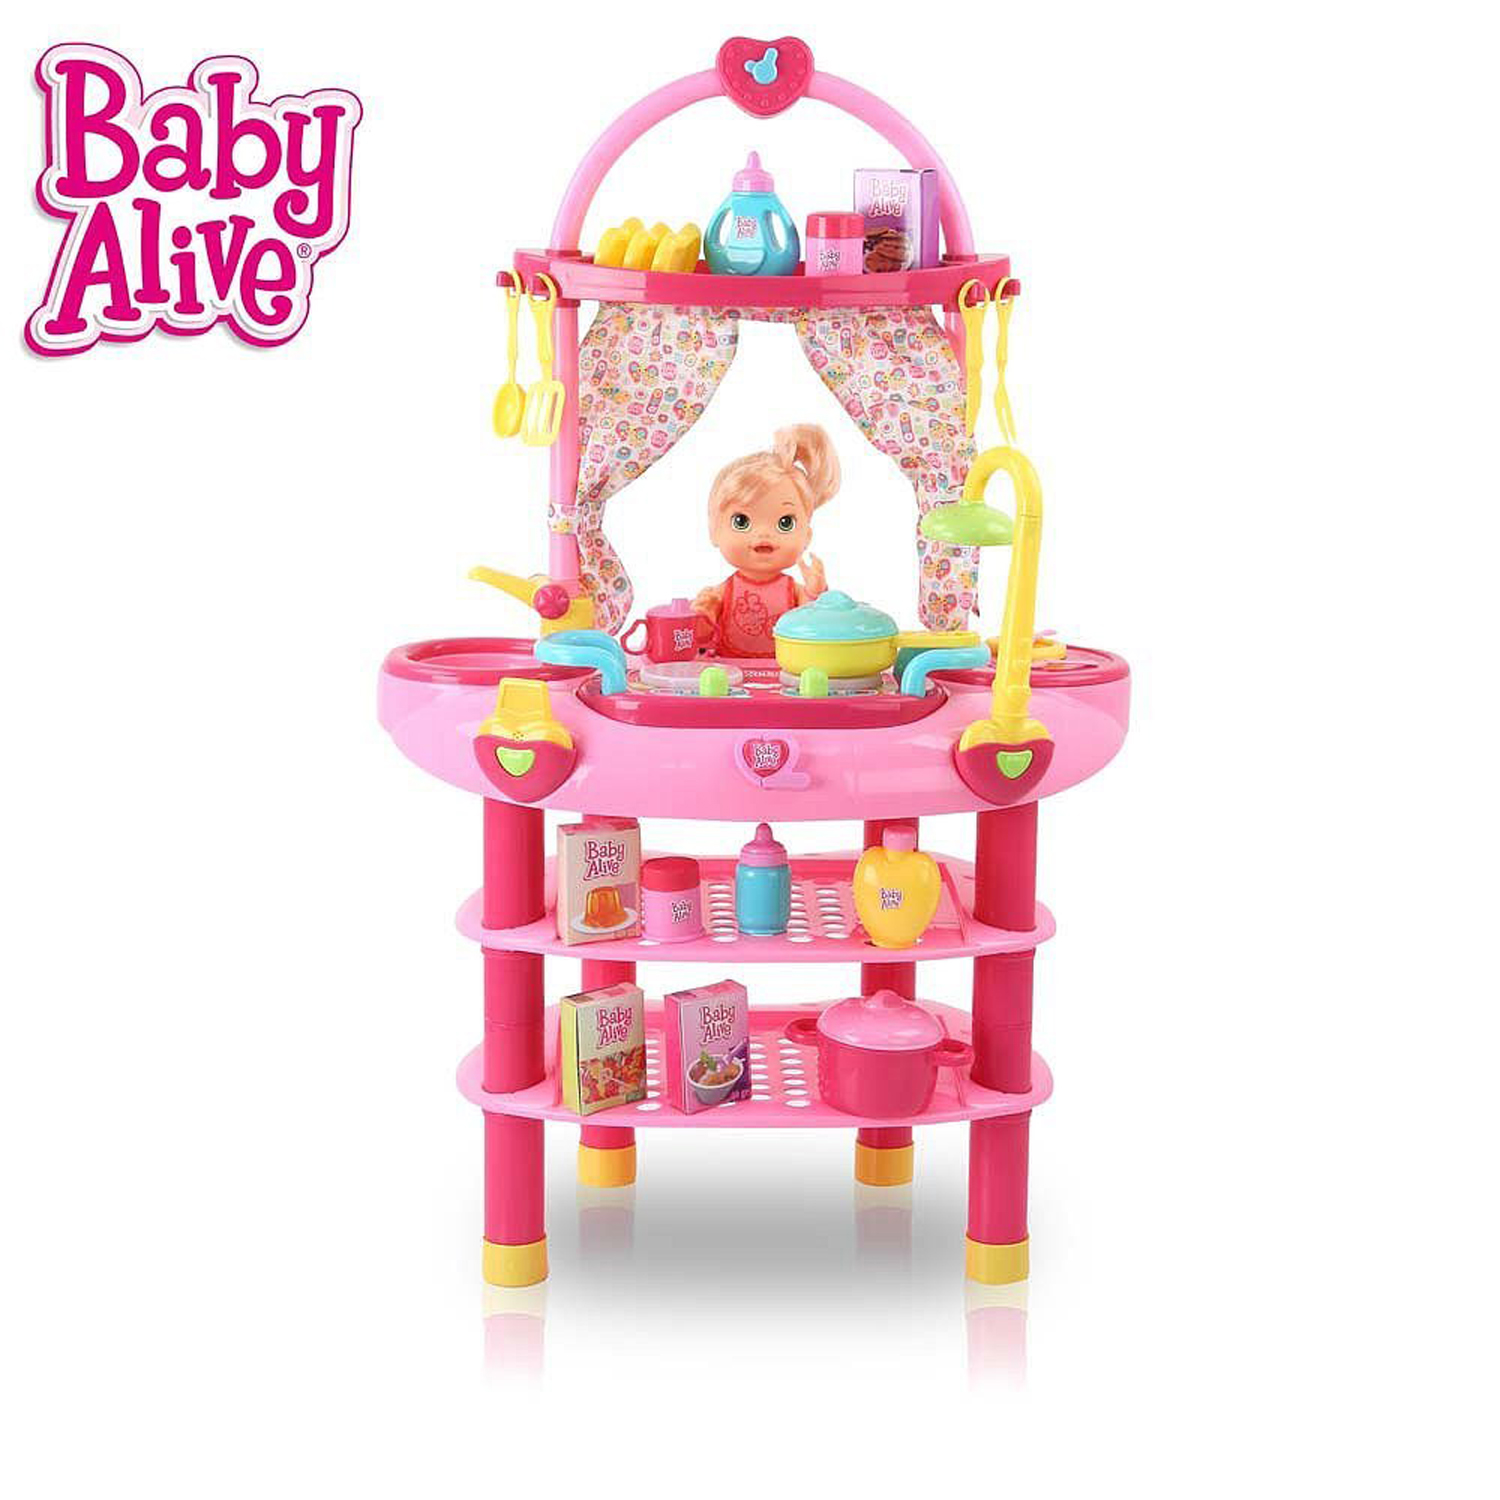 Baby Alive Doll 3 in 1 Cook ?n Care Play Set - image 2 of 8